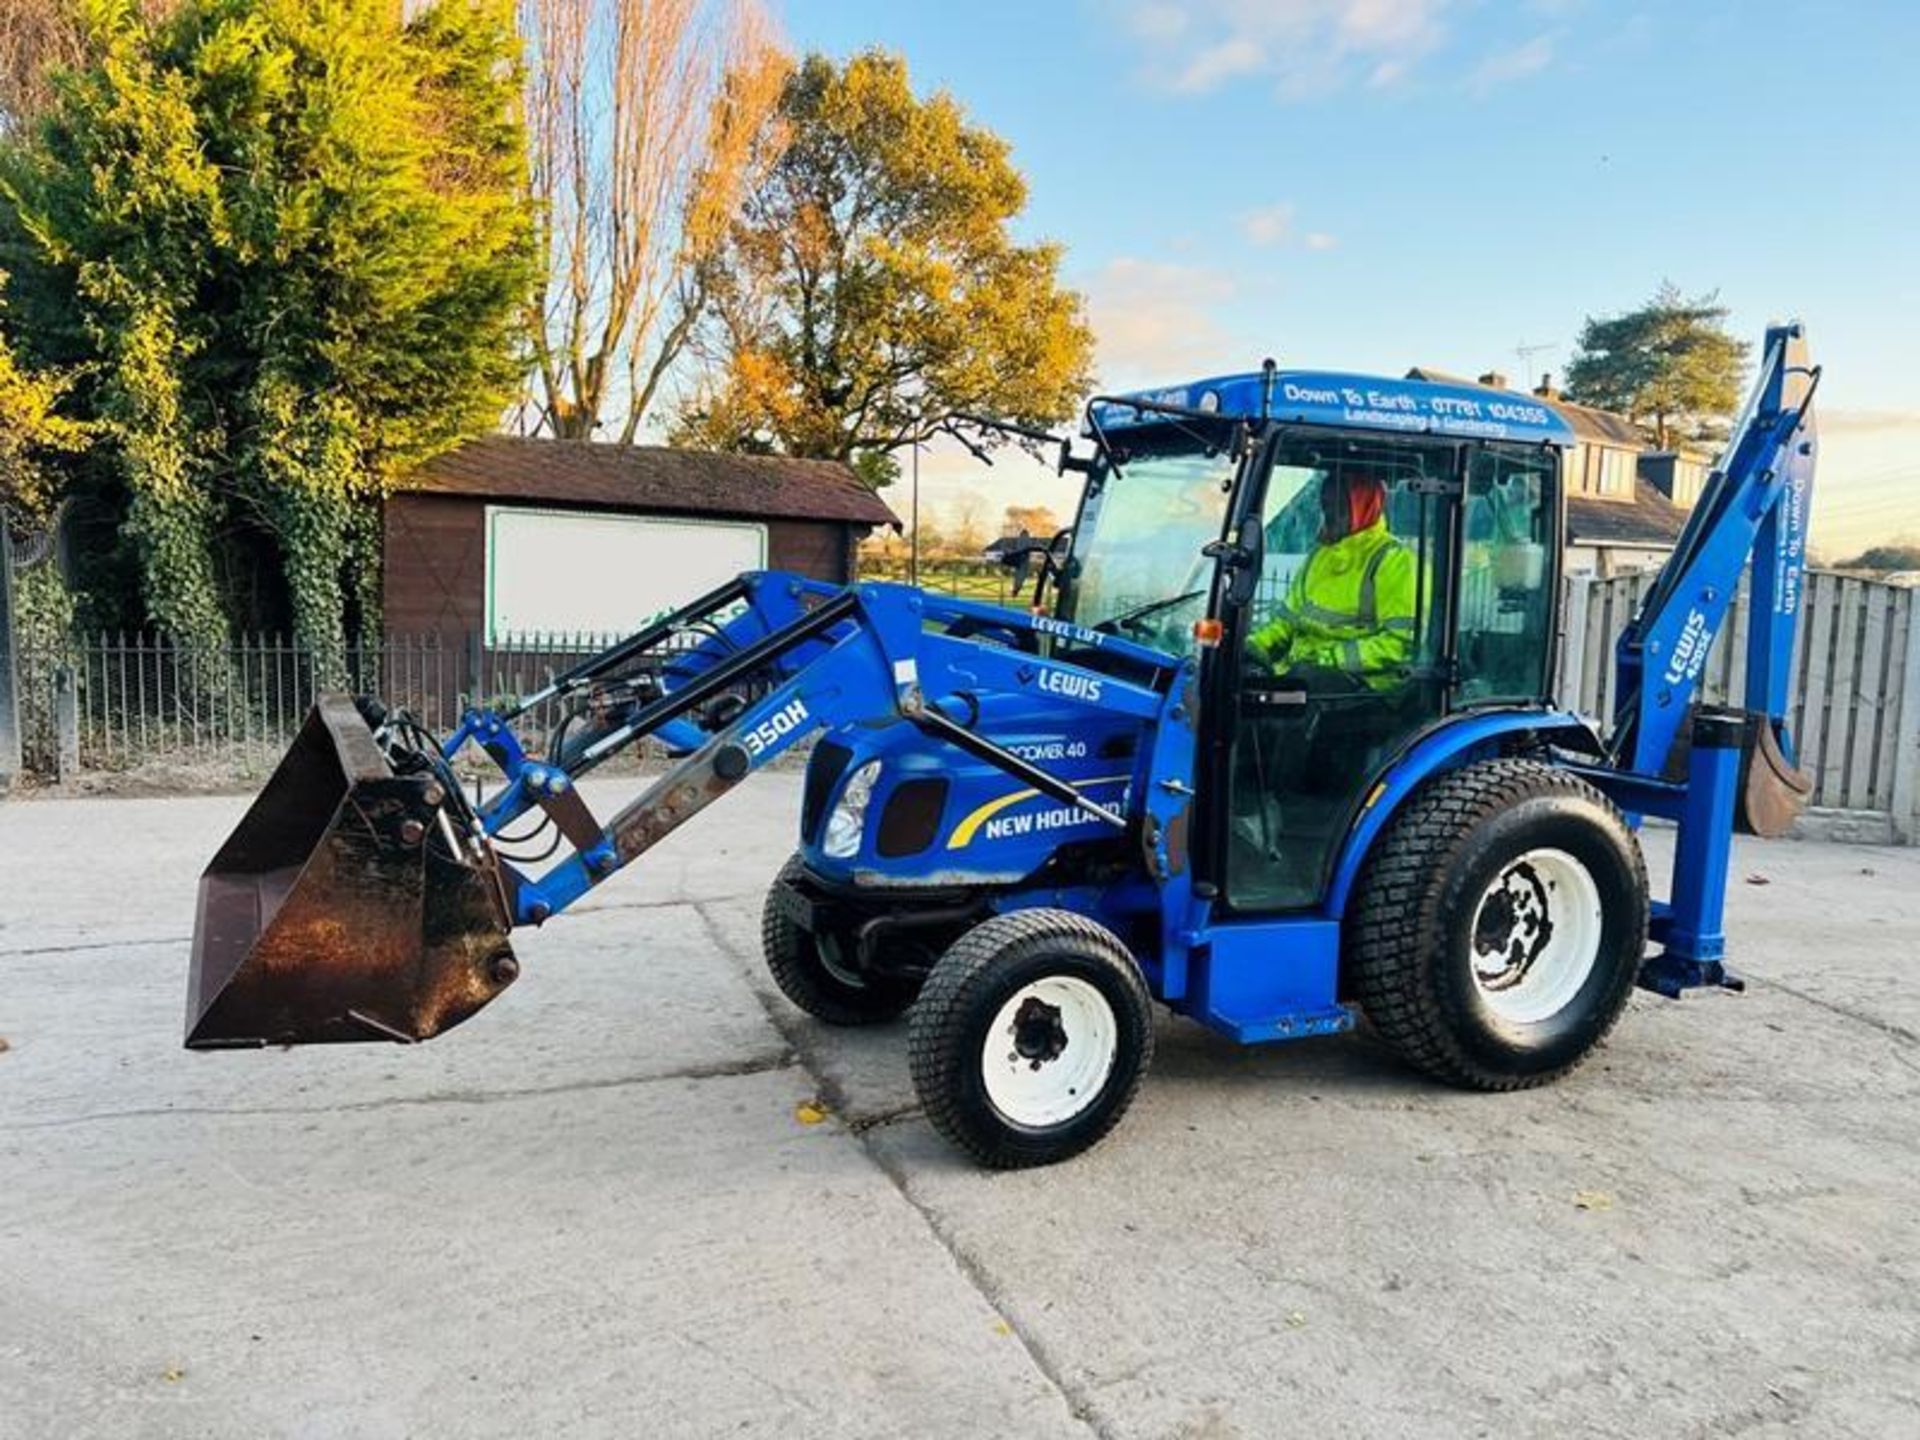 NEW HOLLAND BOOMER 40 4WD TRACTOR *YEAR 2014, ONLY 737 HRS* C/W LOADER & BACK TRACTOR - Image 17 of 19